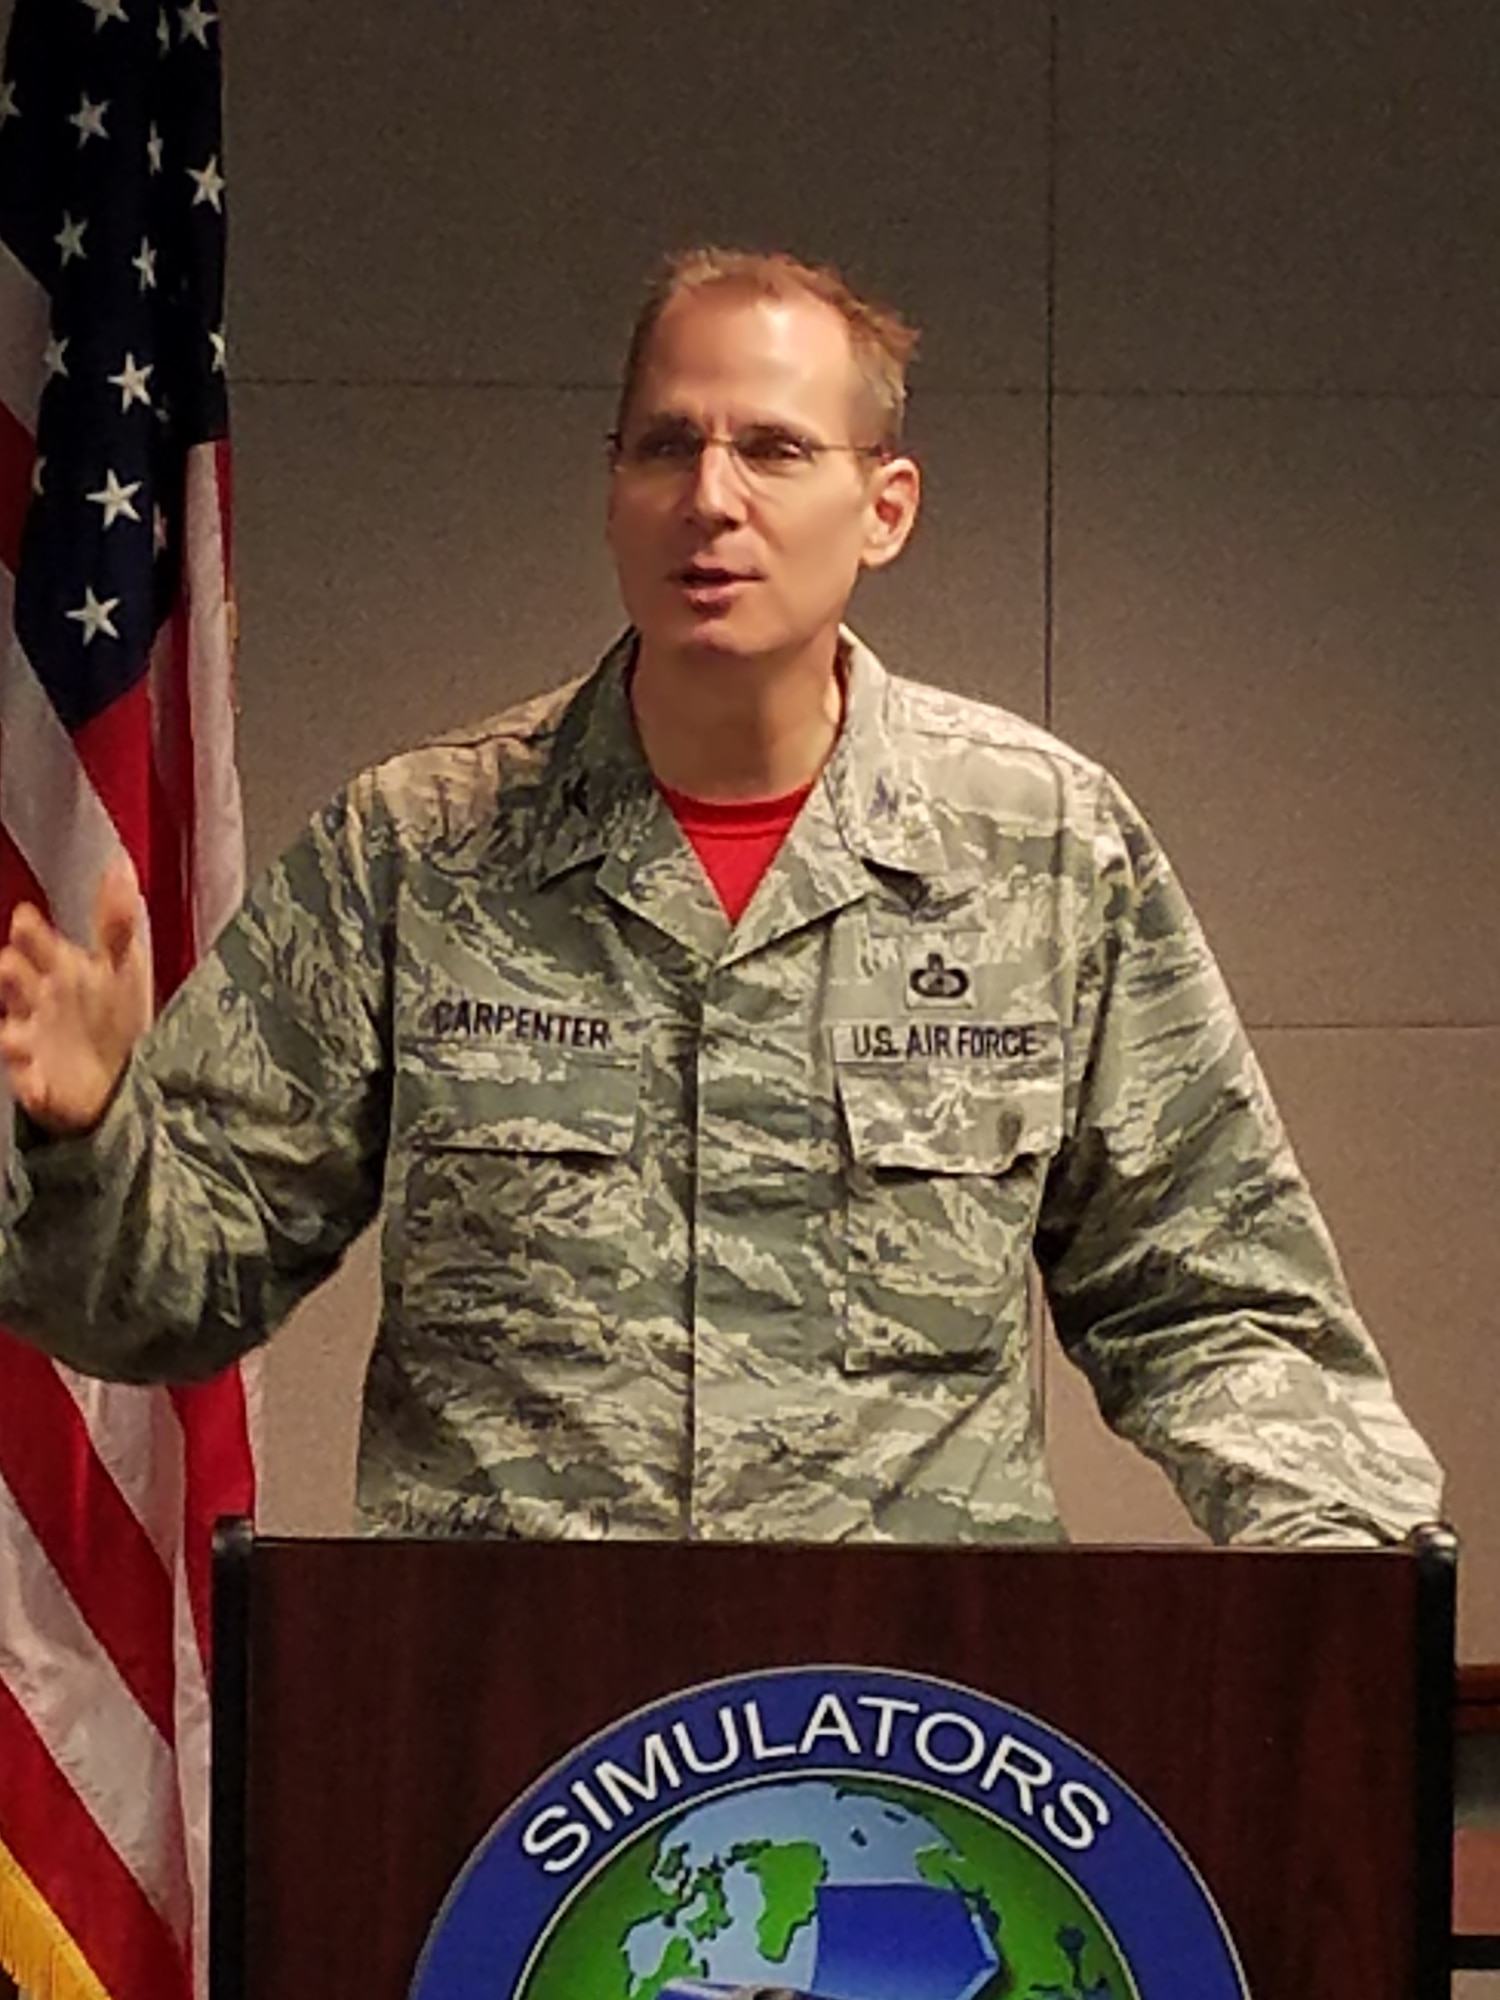 Col. Philip Carpenter, Senior Materiel Leader, Simulators Program Office, provided opening remarks during a recent simulation and training forum. The program office is responsible for executing a $1 billion annual budget for over 56 programs at eight Major Commands with a portfolio of 2300+ training devices/configurations worldwide. (U.S. Air Force photo / Simulators Program Office)